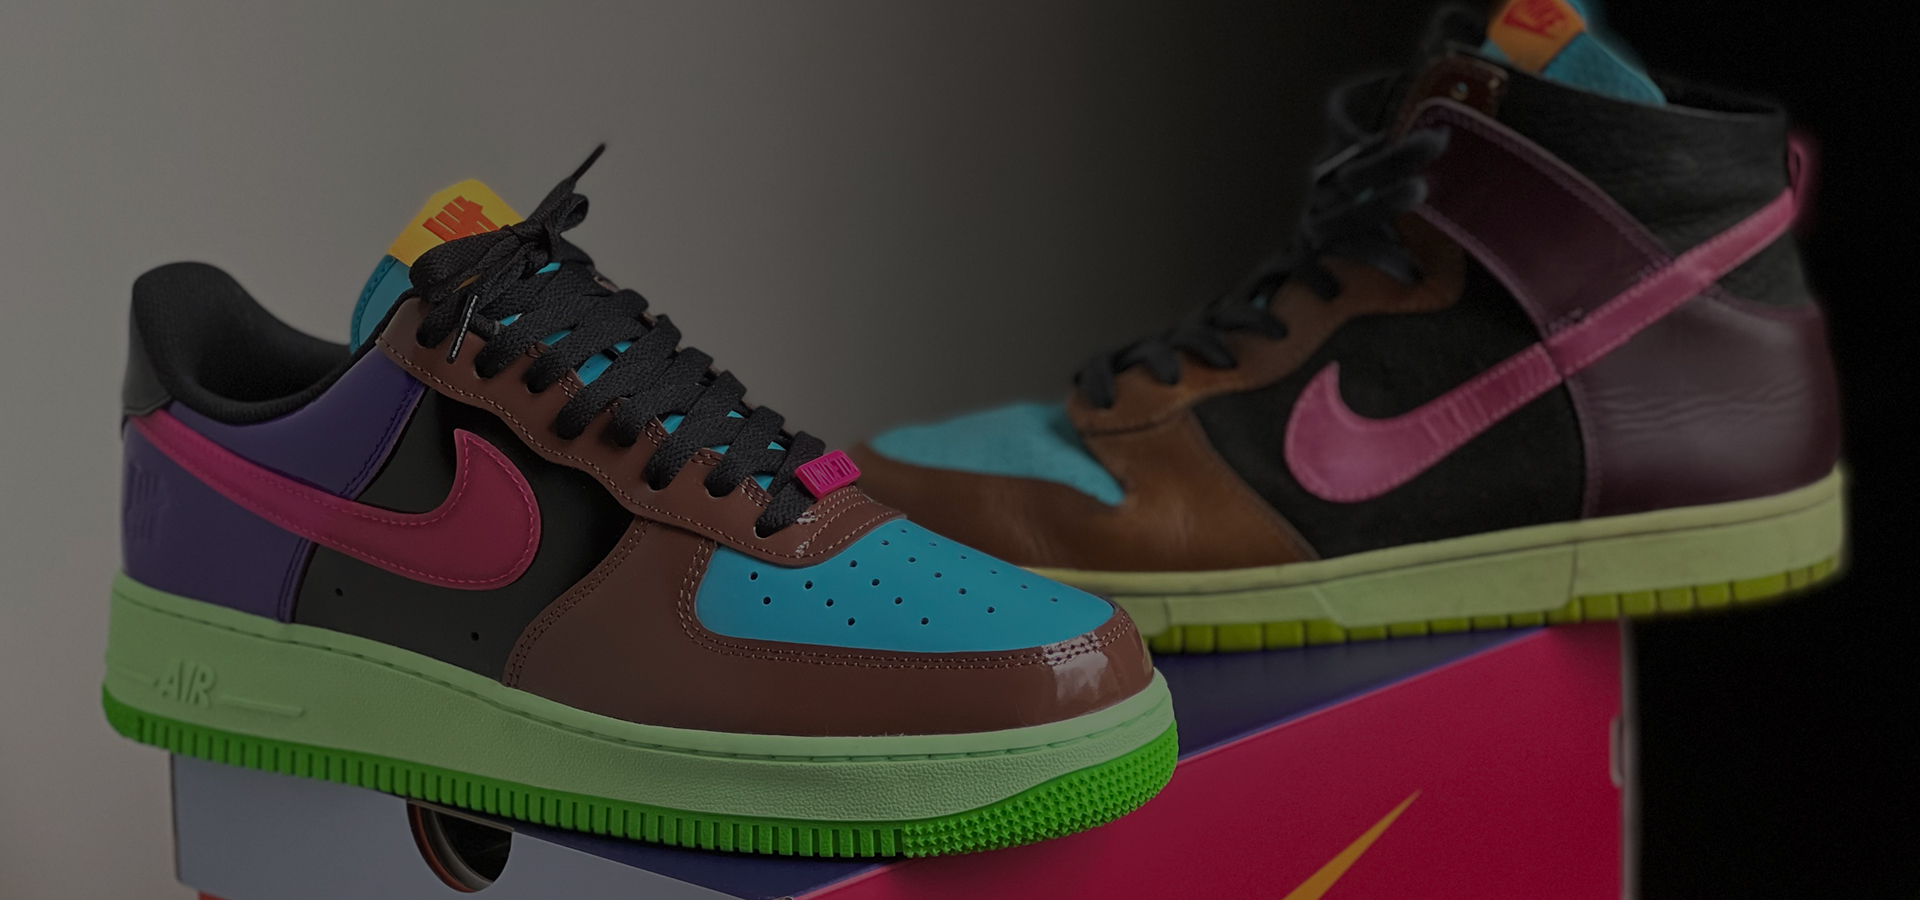 Undefeated Nike Air Force 1 Multi-Color Patent Pack | SneakerNews.com